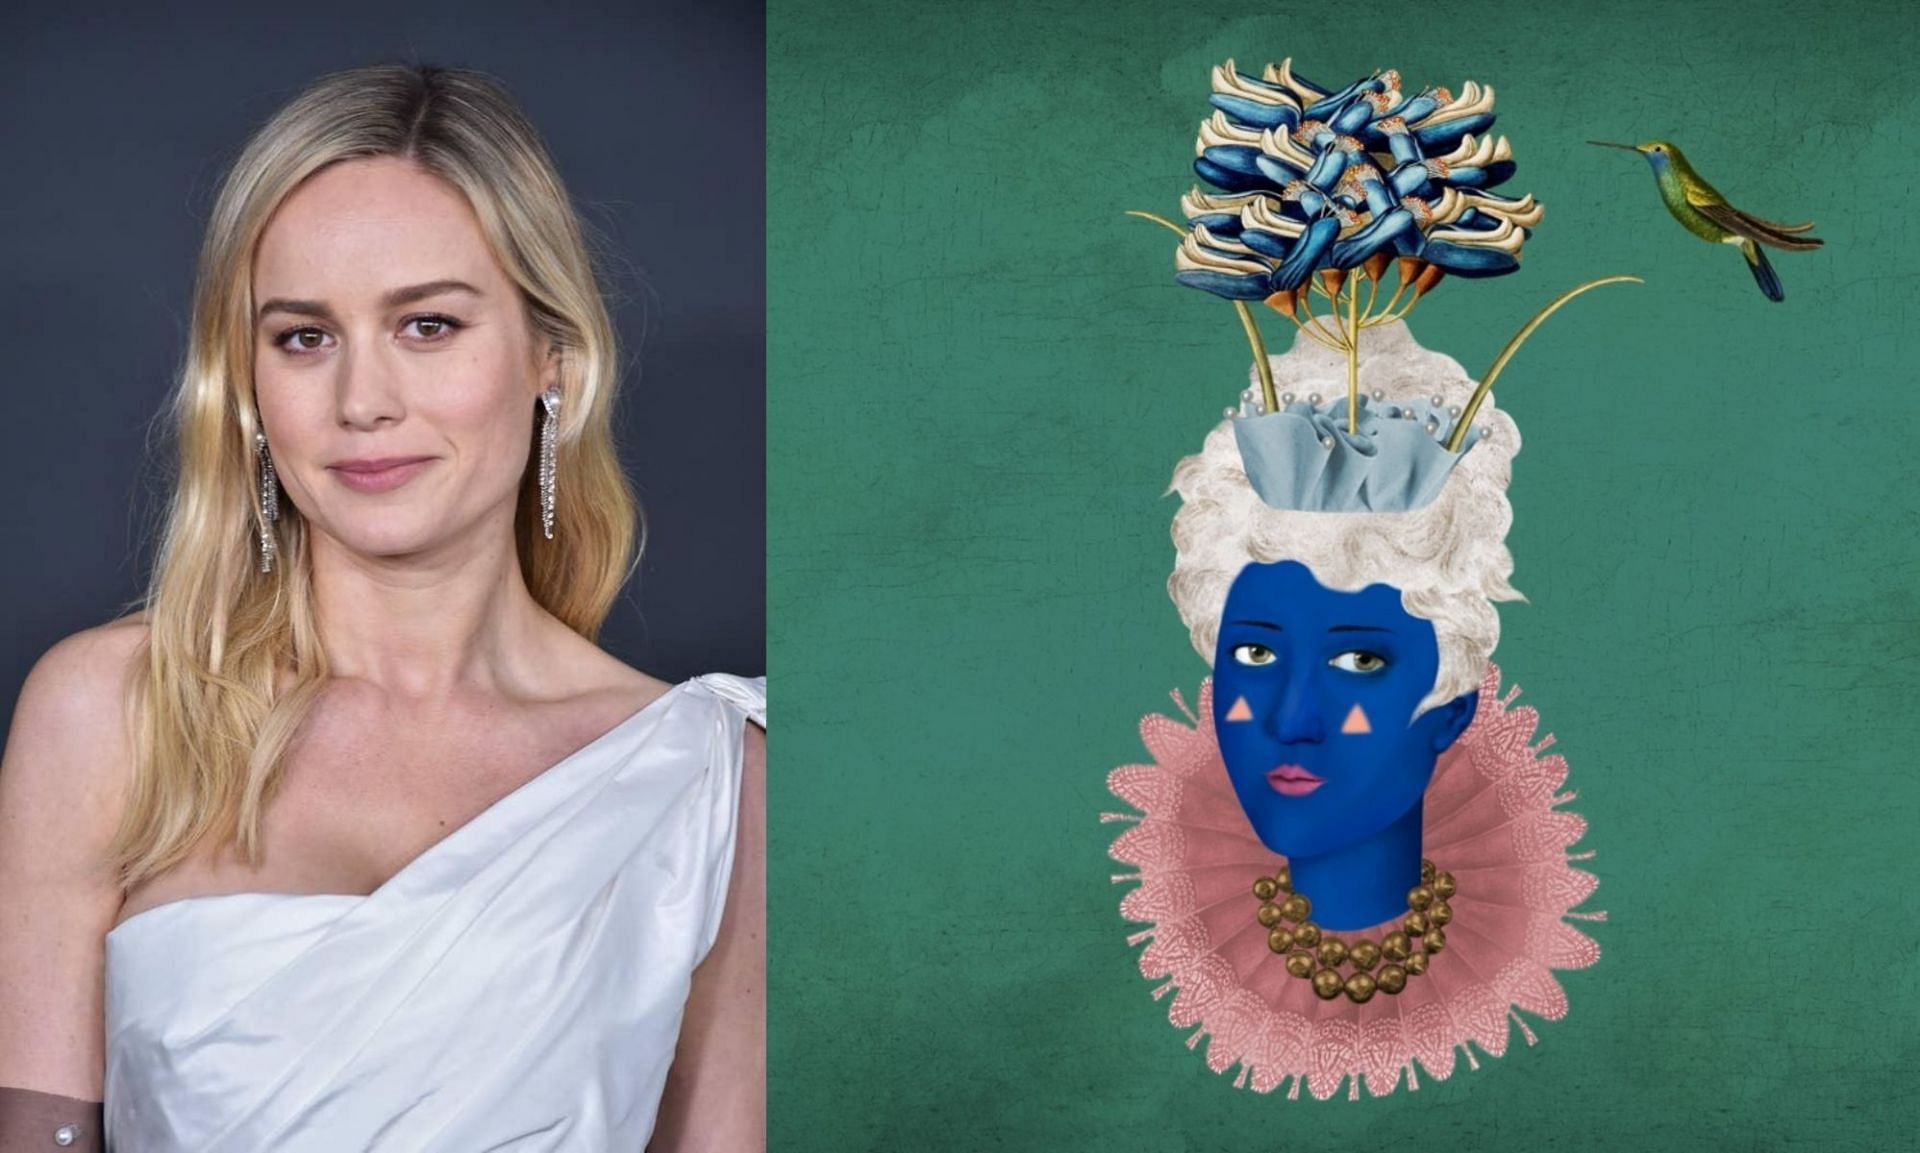 Brie Larson and her NFT profile picture (Image via Aaron J. Thornton/Getty Images, and brielarson/Twitter)